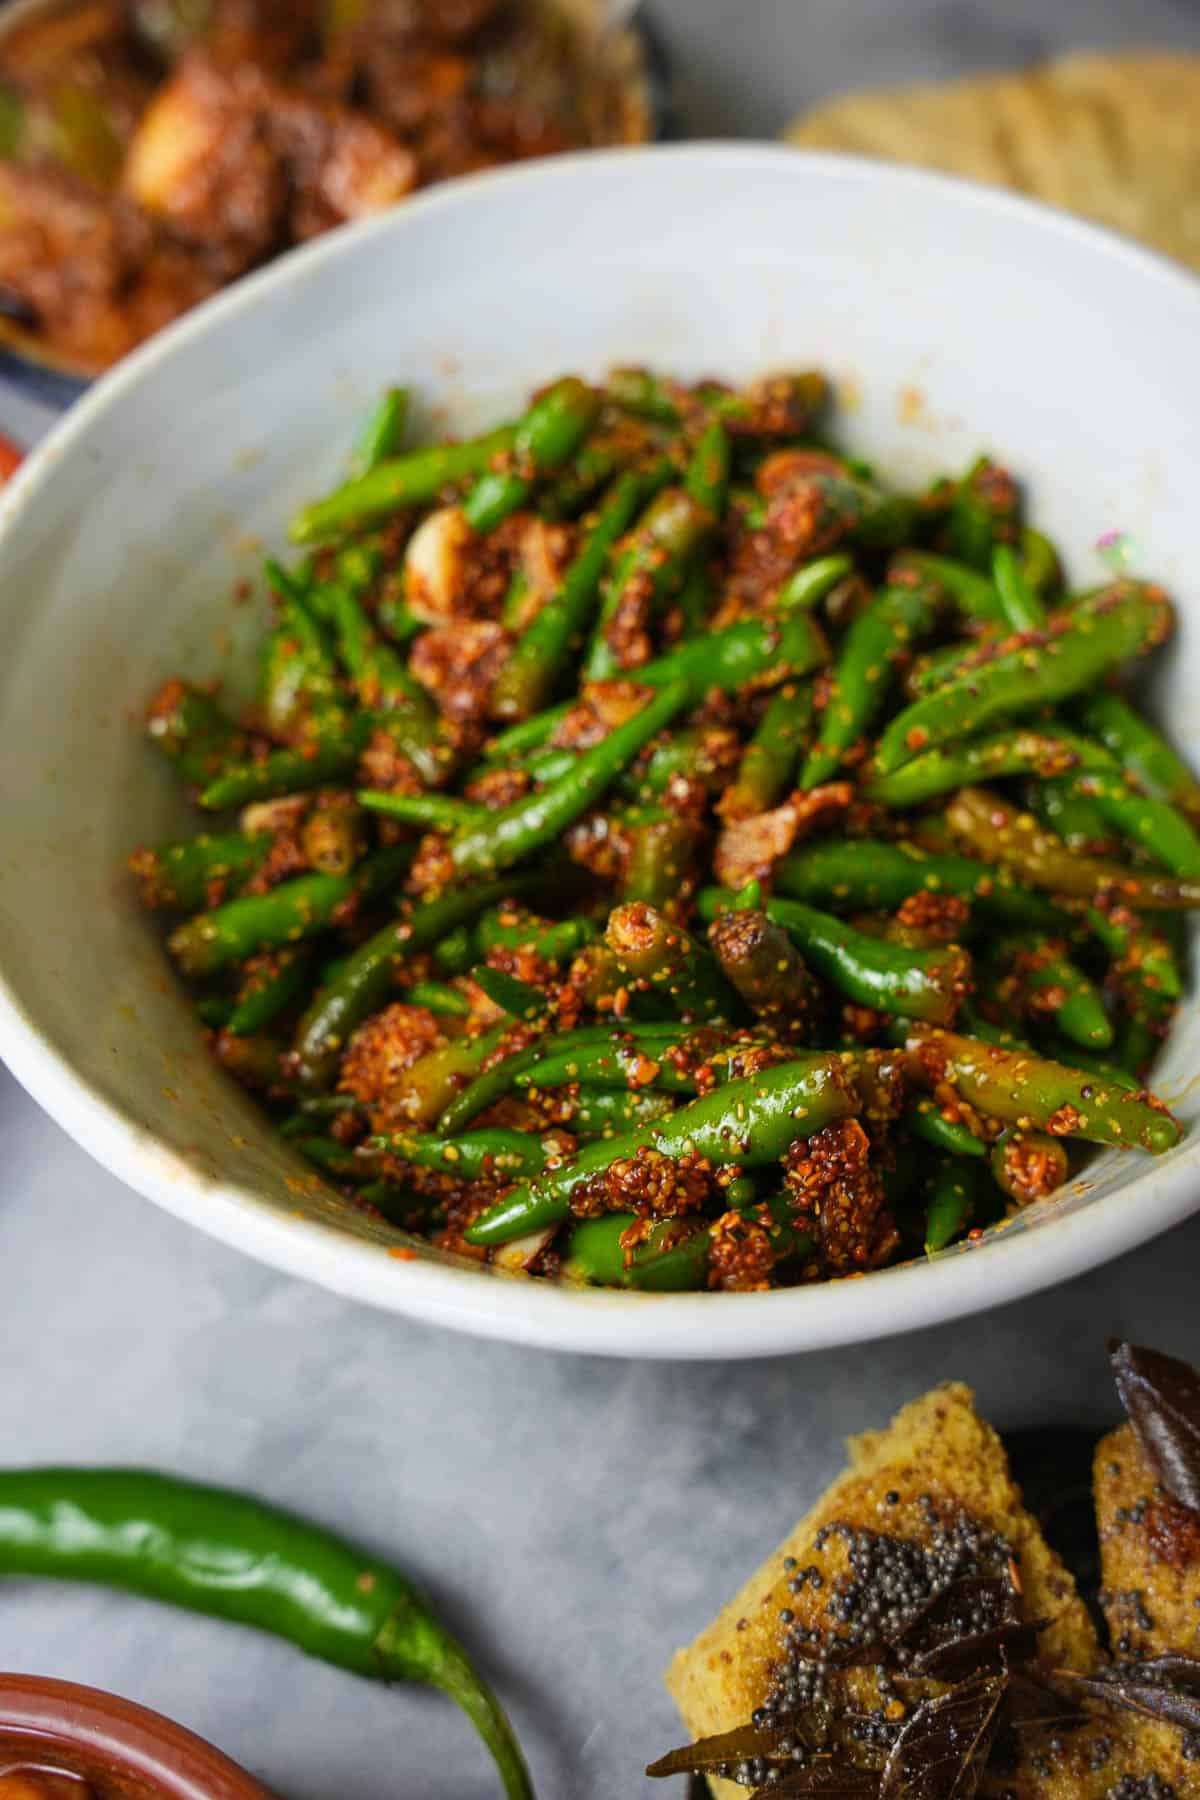 a bowl of green chilies with spices and dhokla.